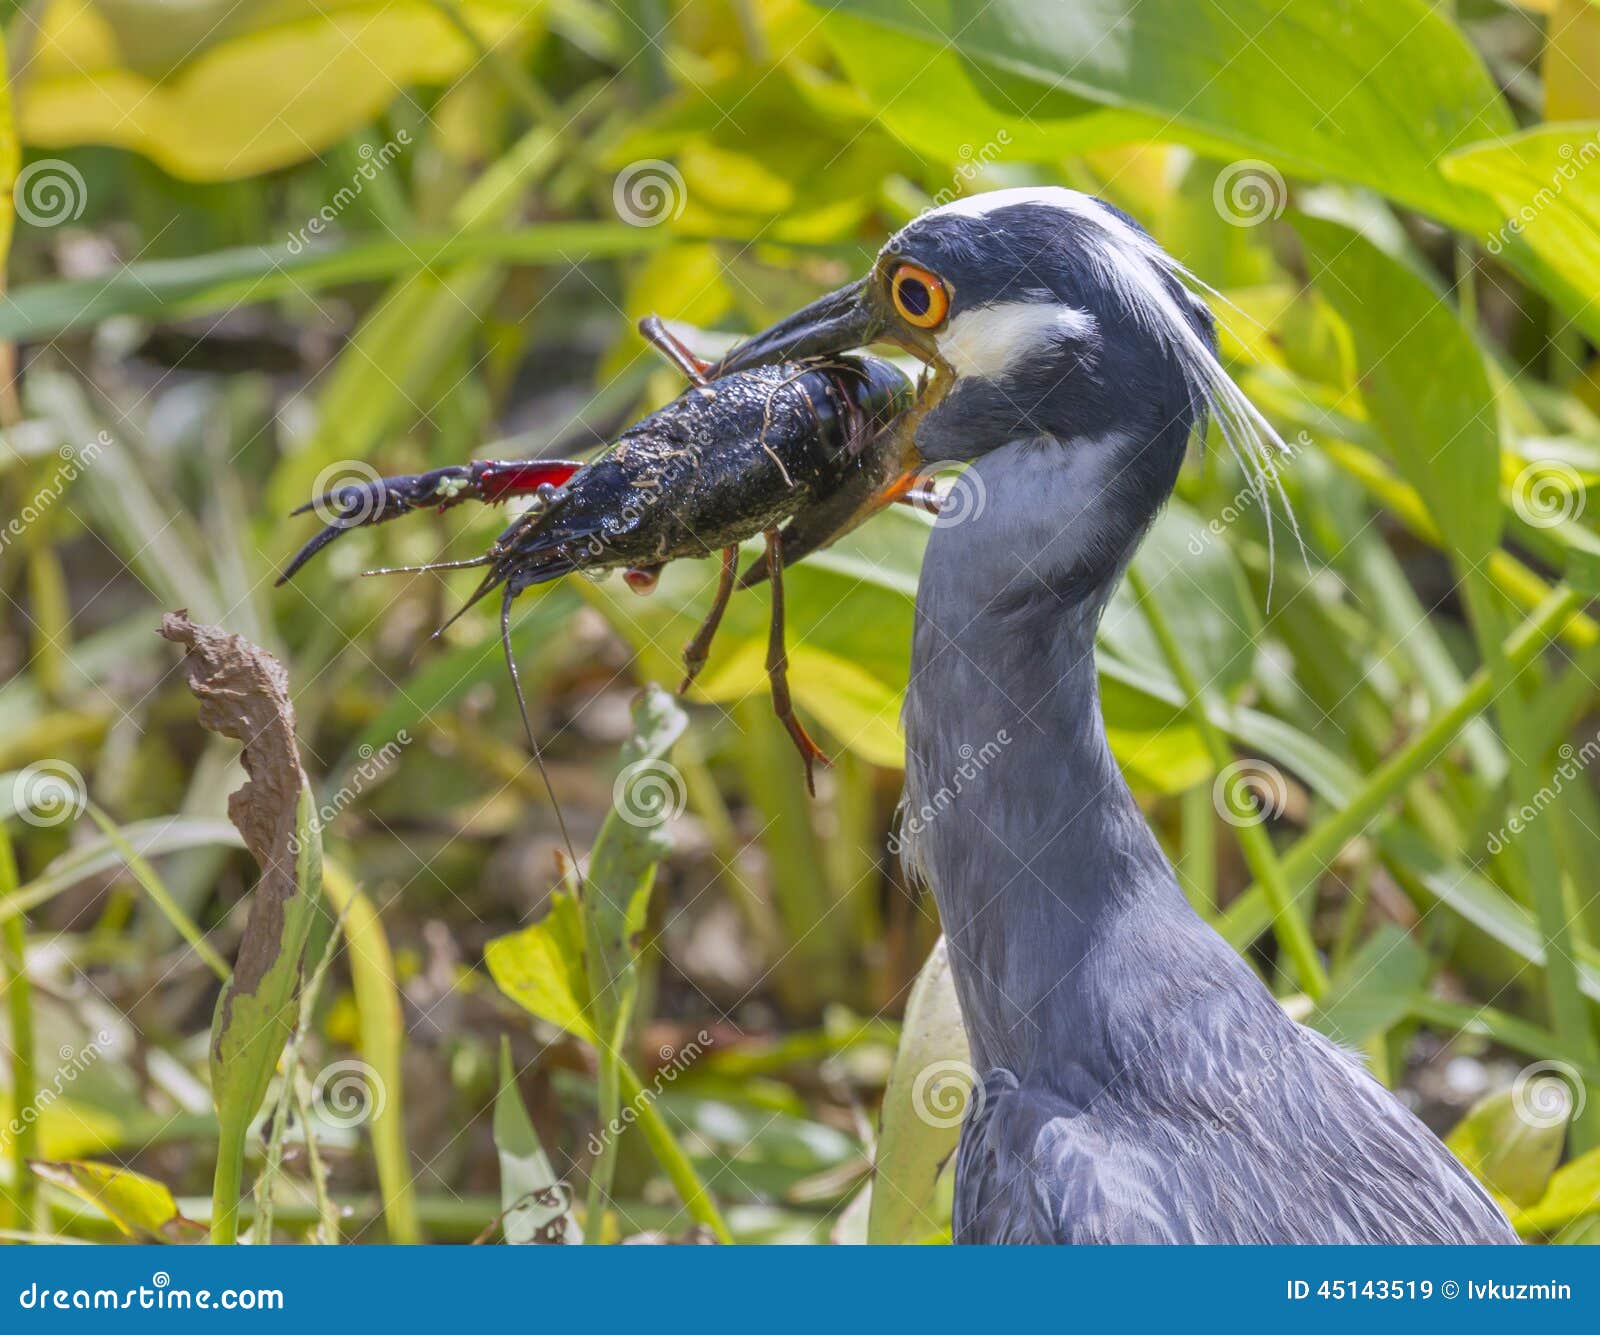 yellow-crowned night heron (nyctanassa violacea) with a caught crawfish.